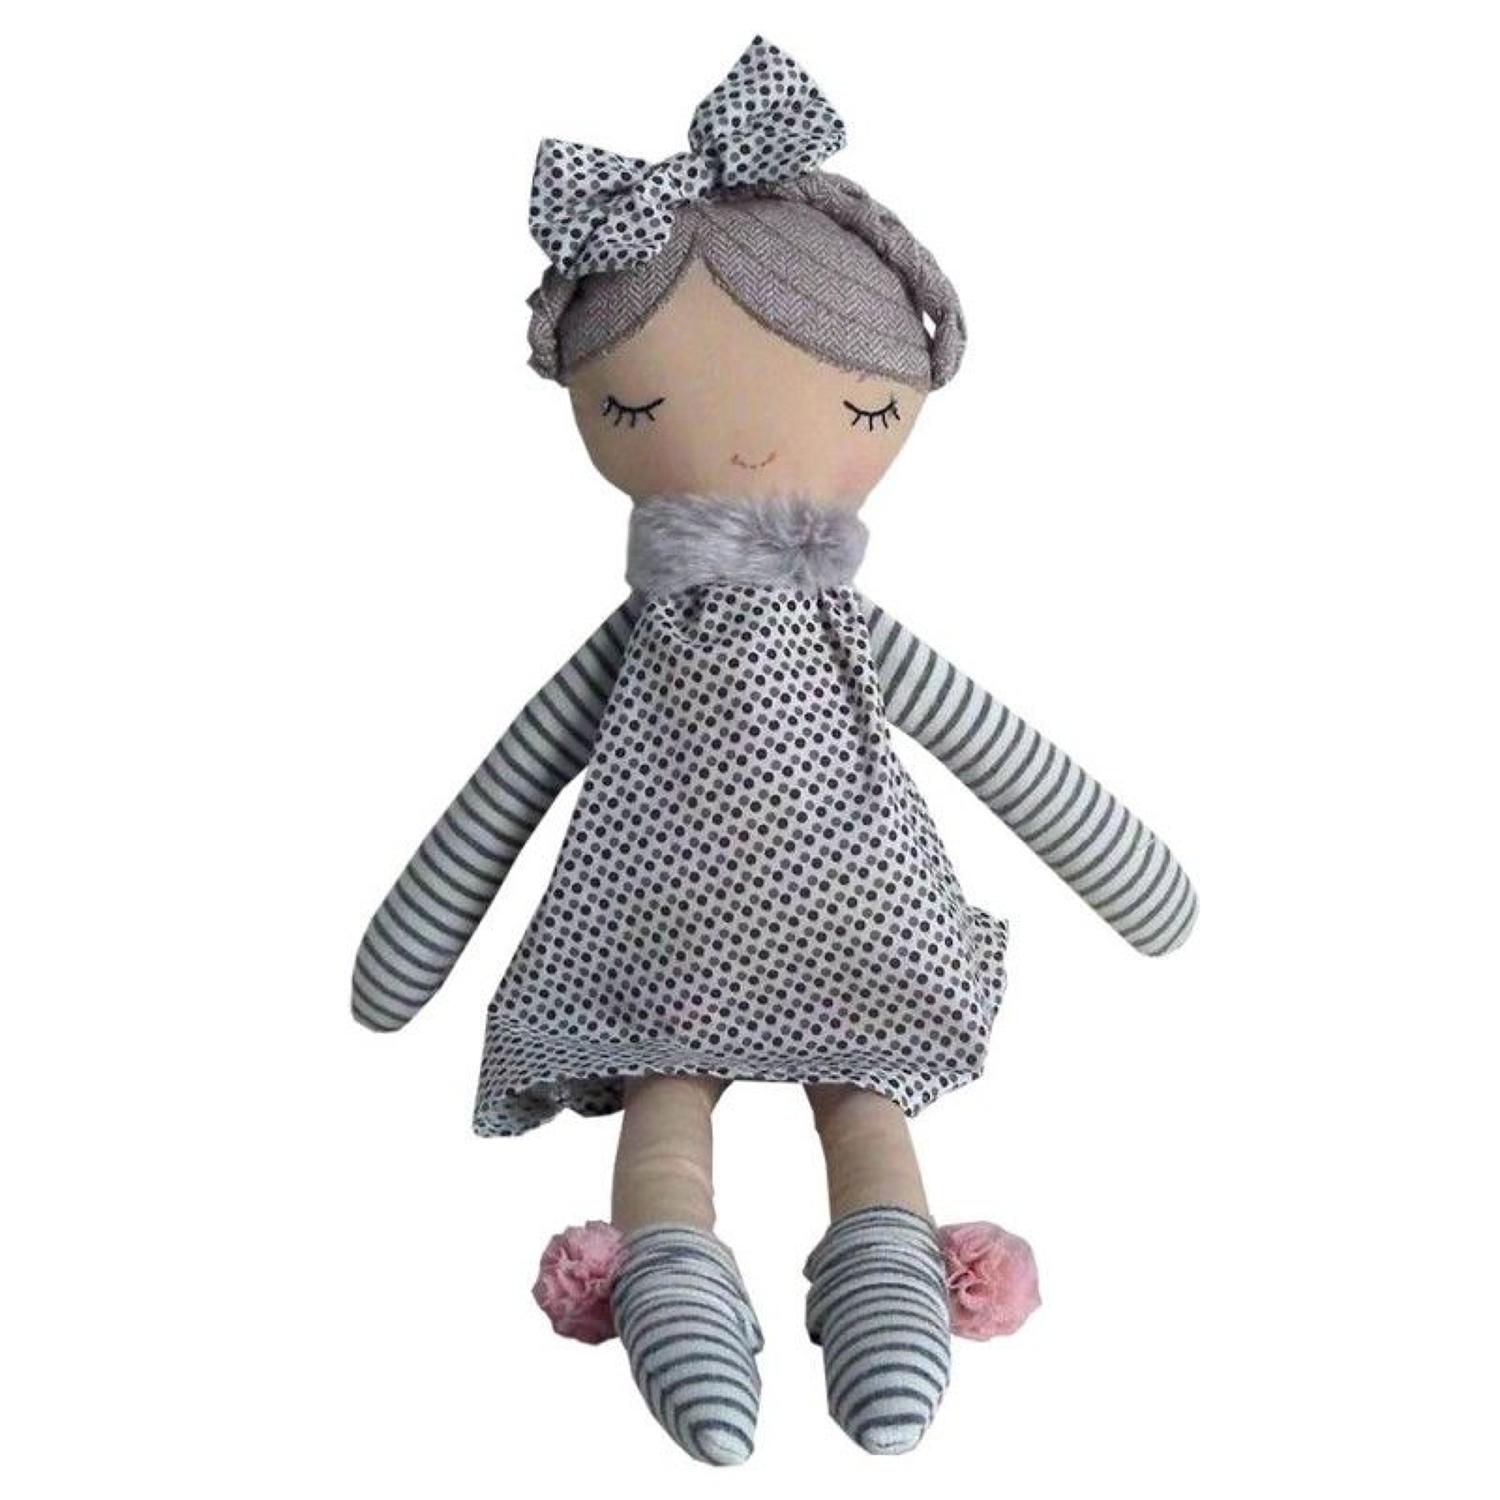 Wilberry Lucy Doll